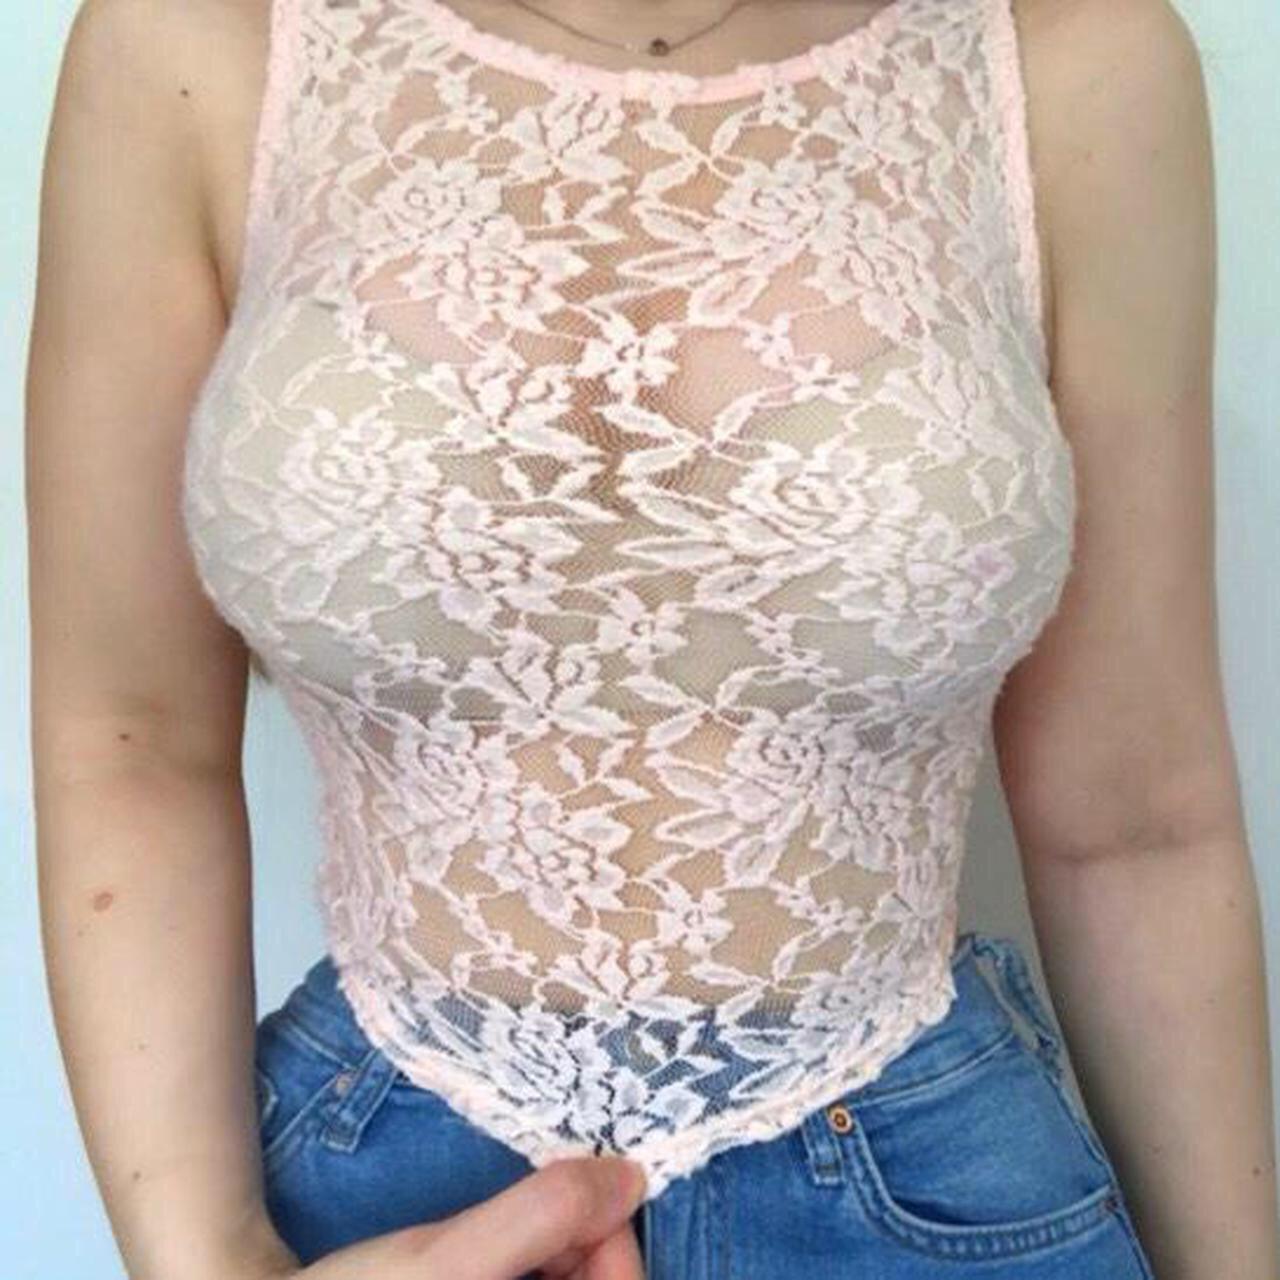 Product Image 2 - Adorable fairycore lace top 🥺🌸

Amazing